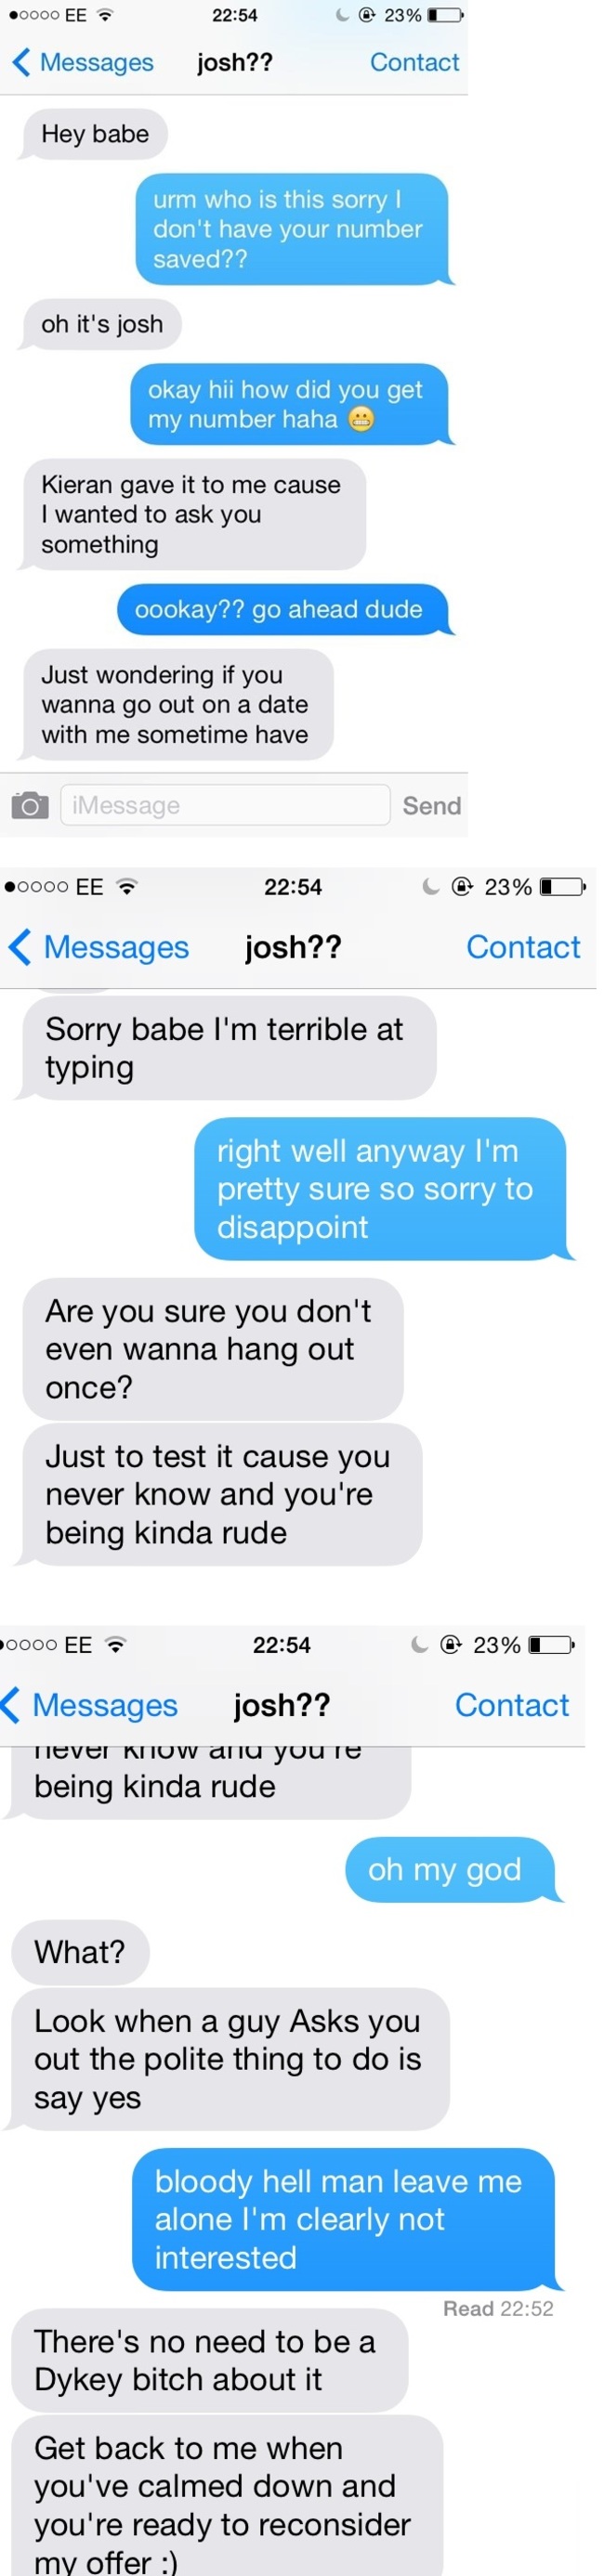 32 "Nice" Guys Who Need To Be Stopped Immediately